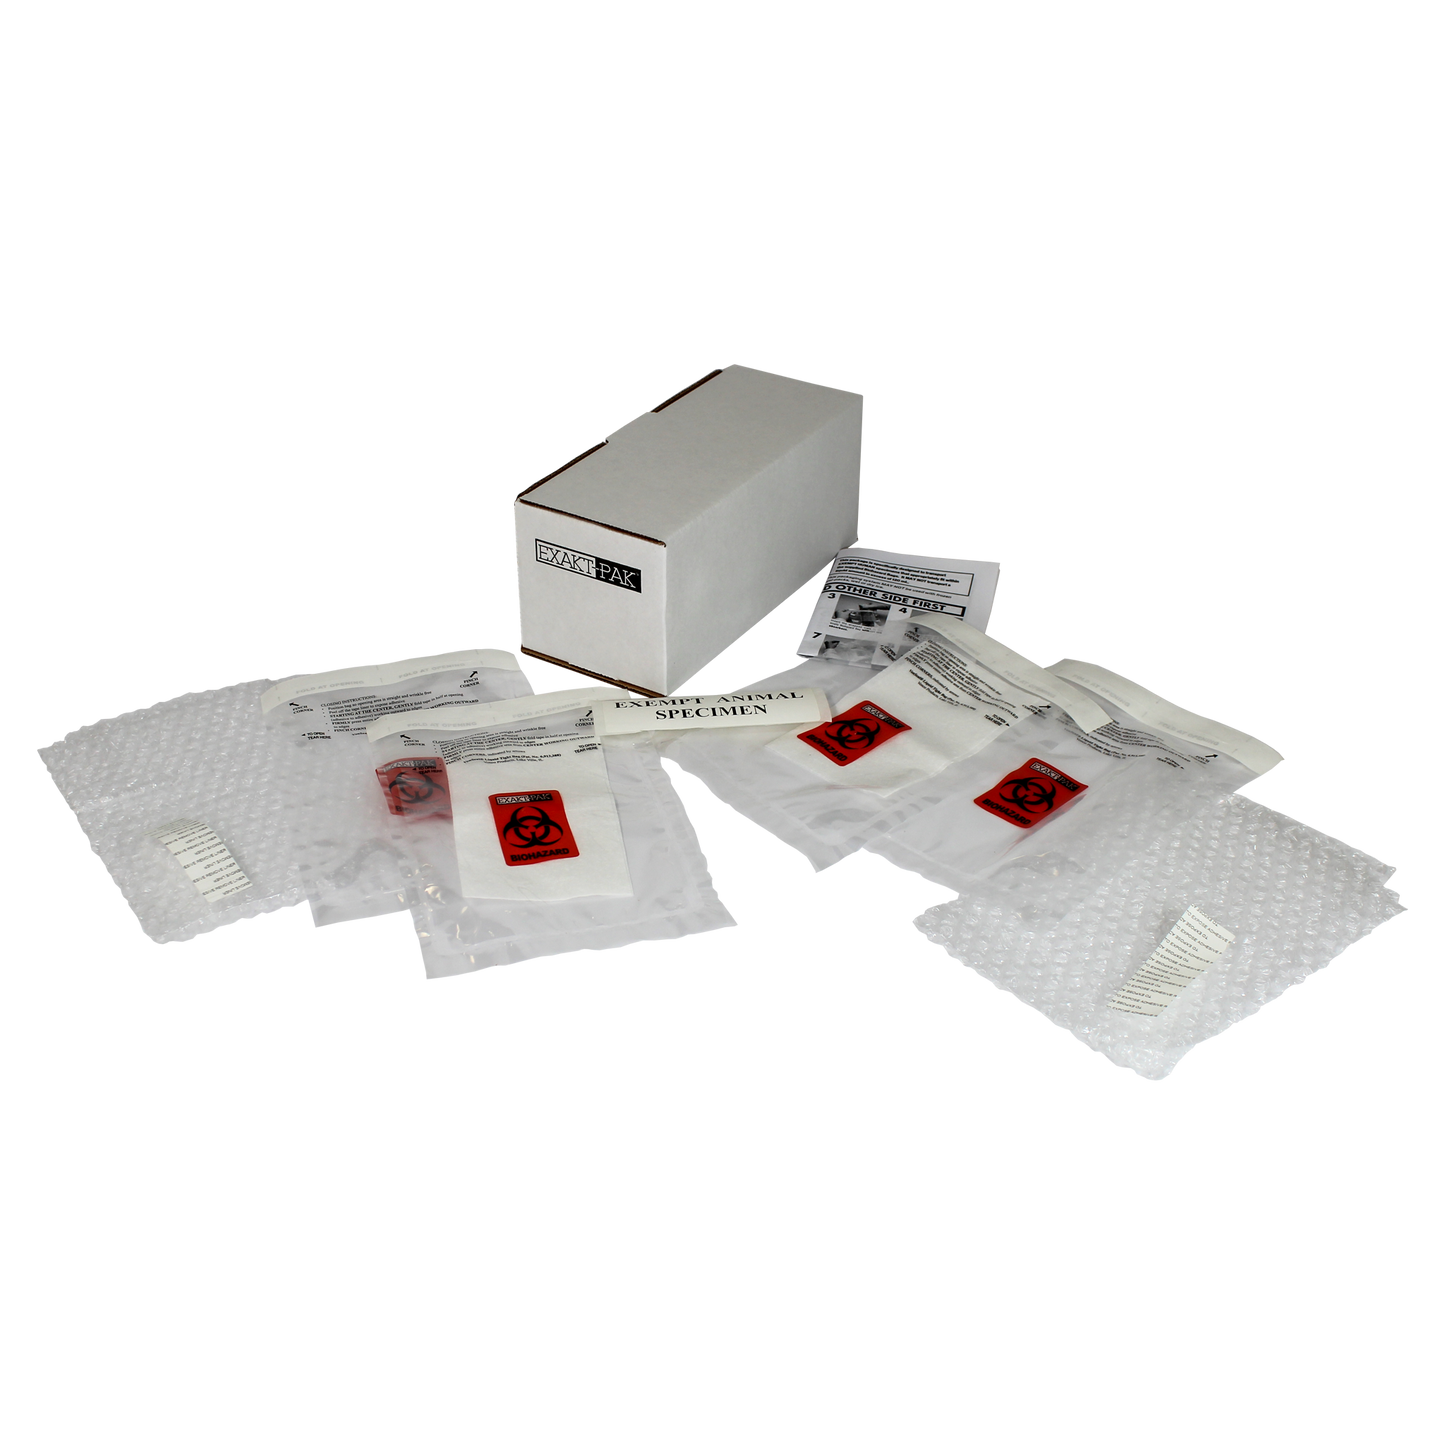 ME-A8750V12 - EXAKT-PAK® Exempt Ambient DX-Pak® Animal Specimen Insulated Shipping Solution for Blood Tube, Test Tubes and Vials